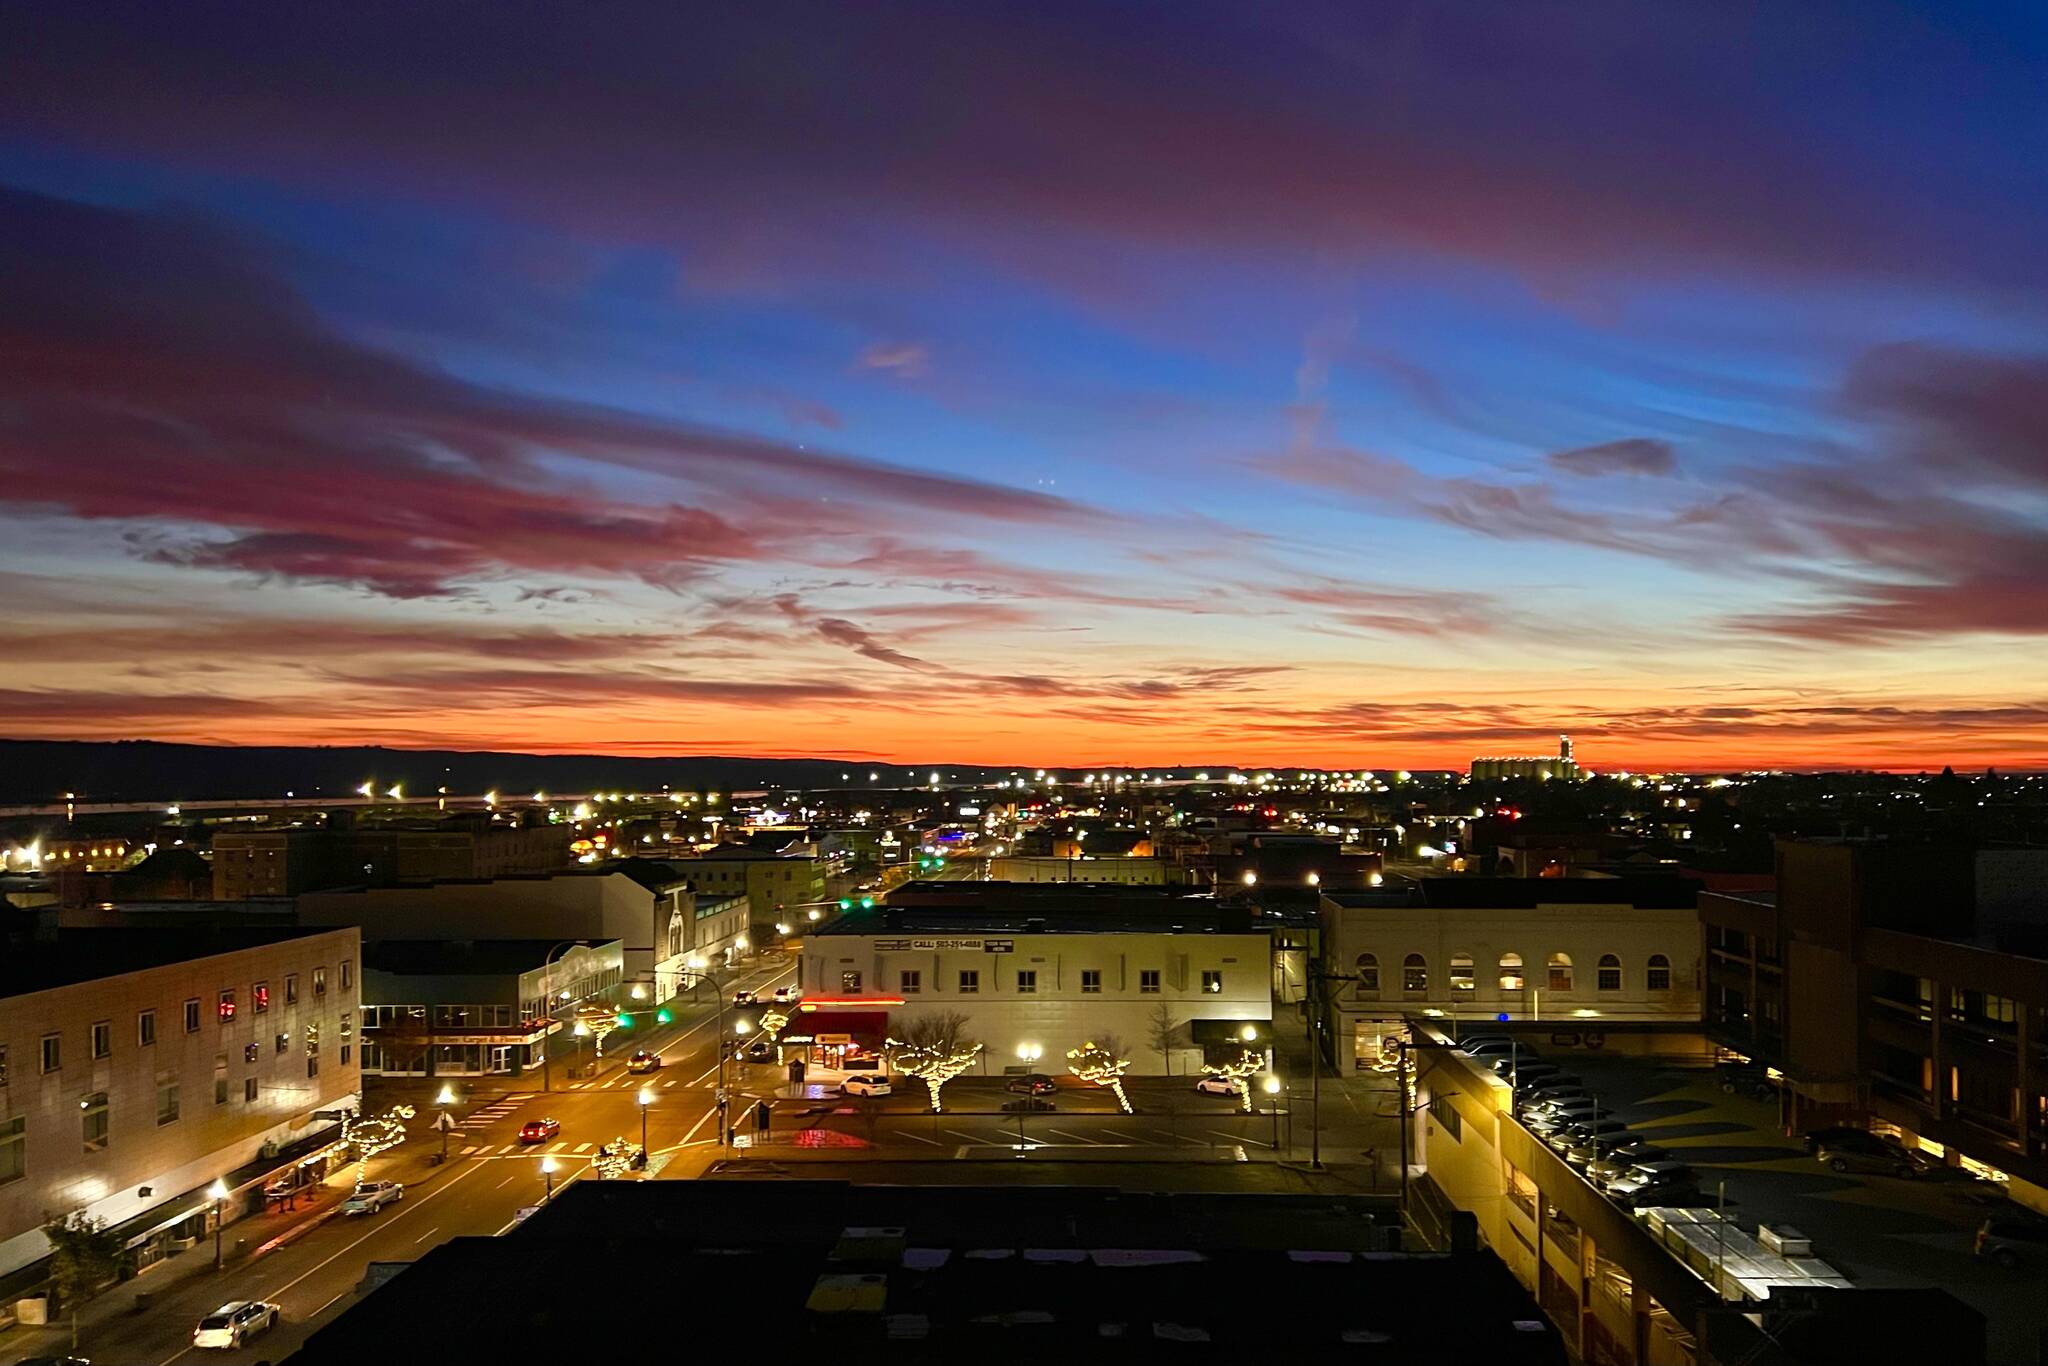 Moyer Multi Media LLC.
Photographing downtown Aberdeen at sunset from the top of the Becker Building.